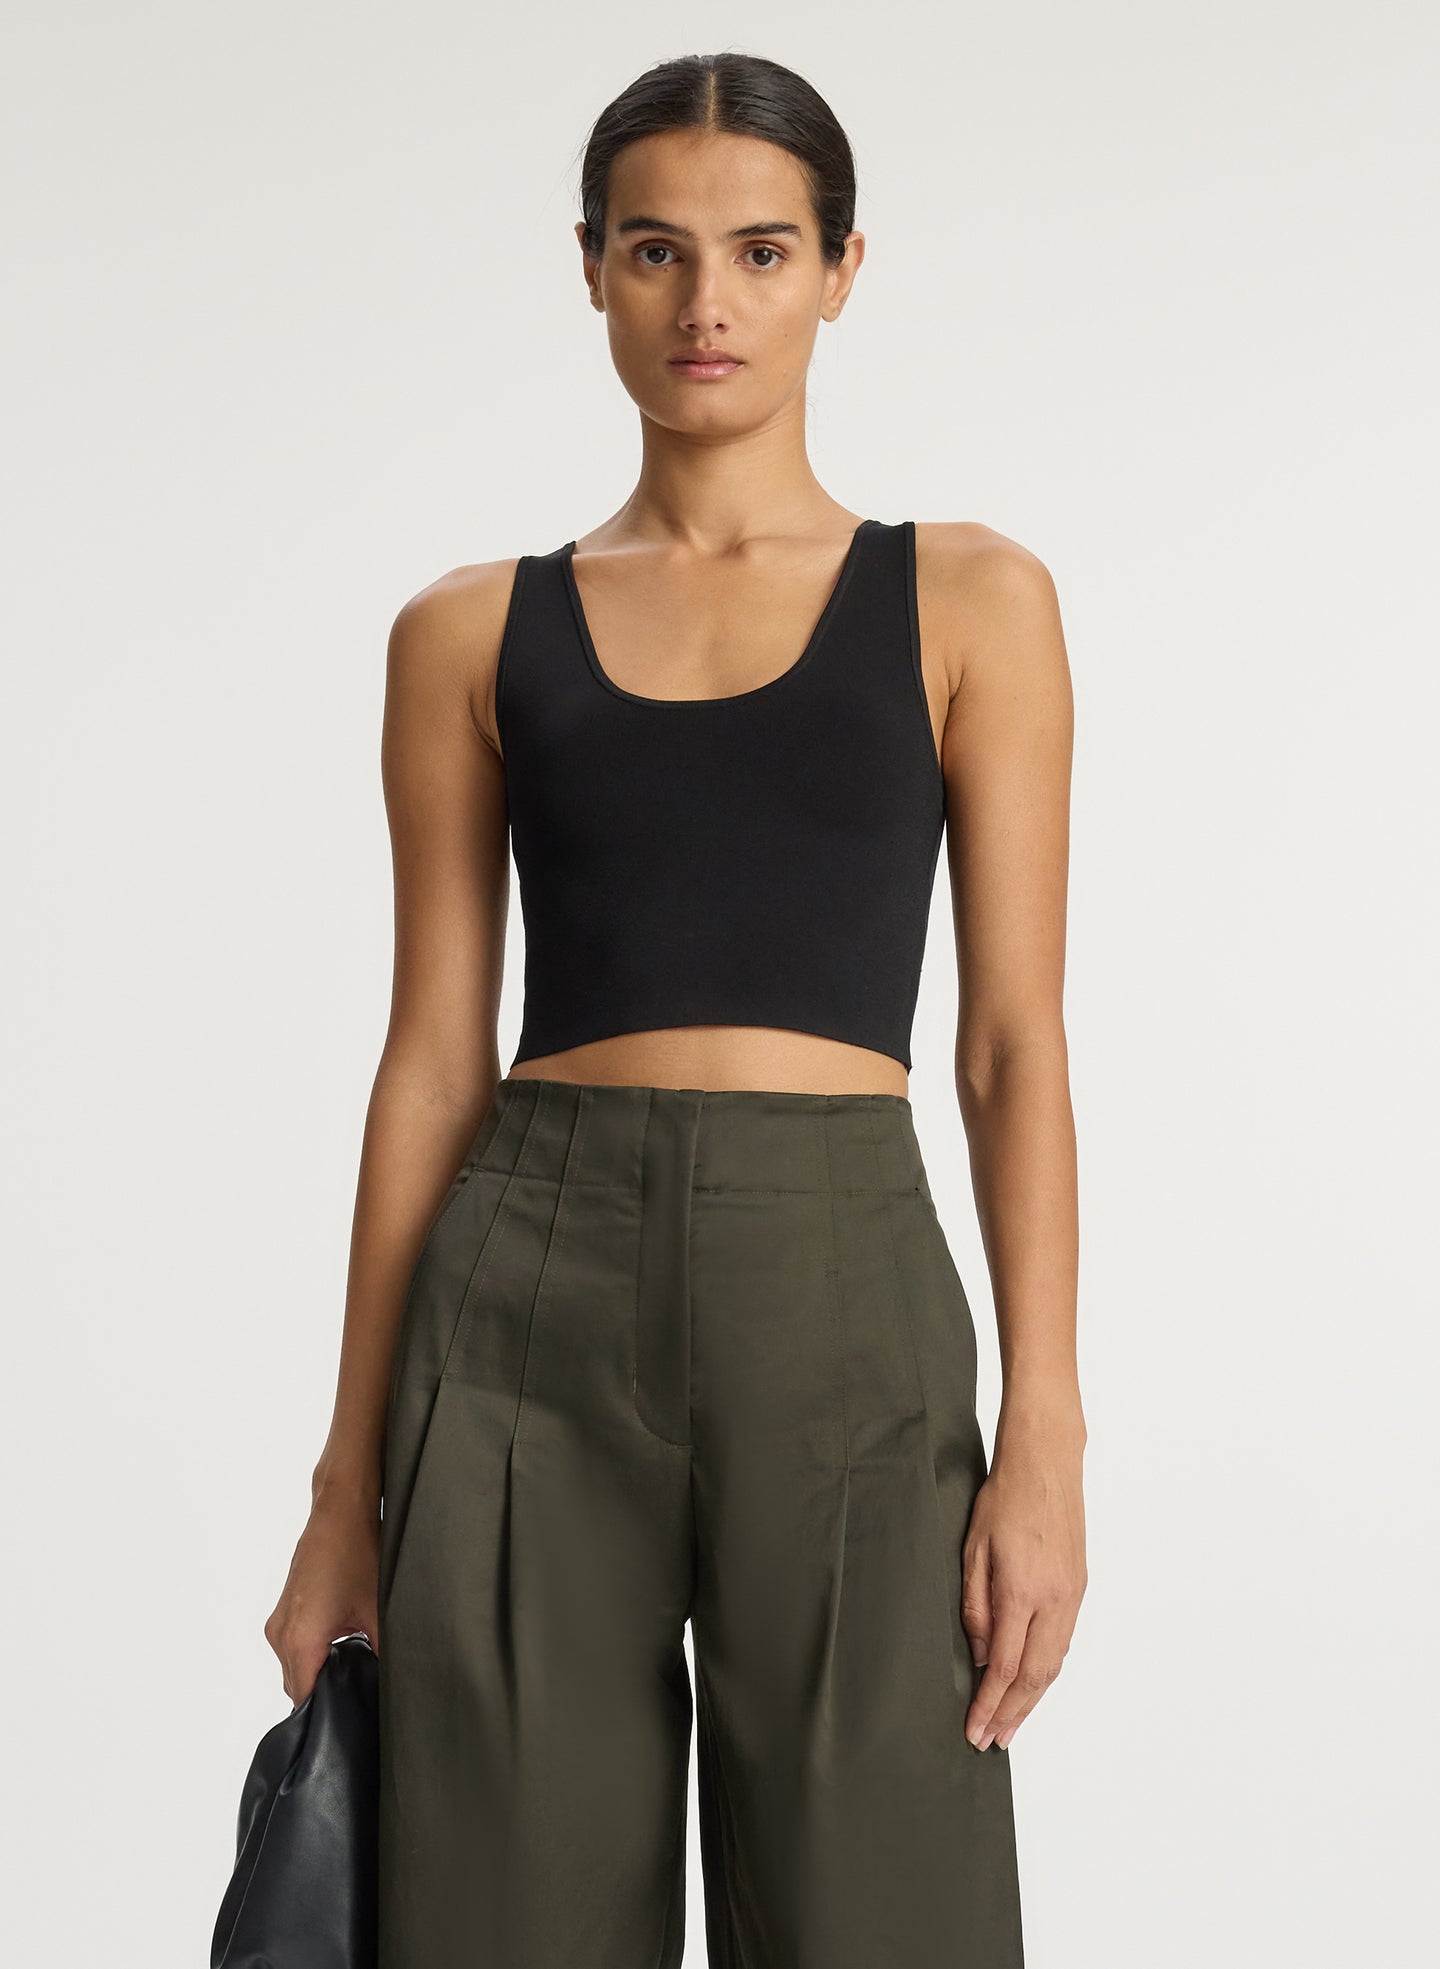 front view of woman wearing black compact knit tank top and olive green pants